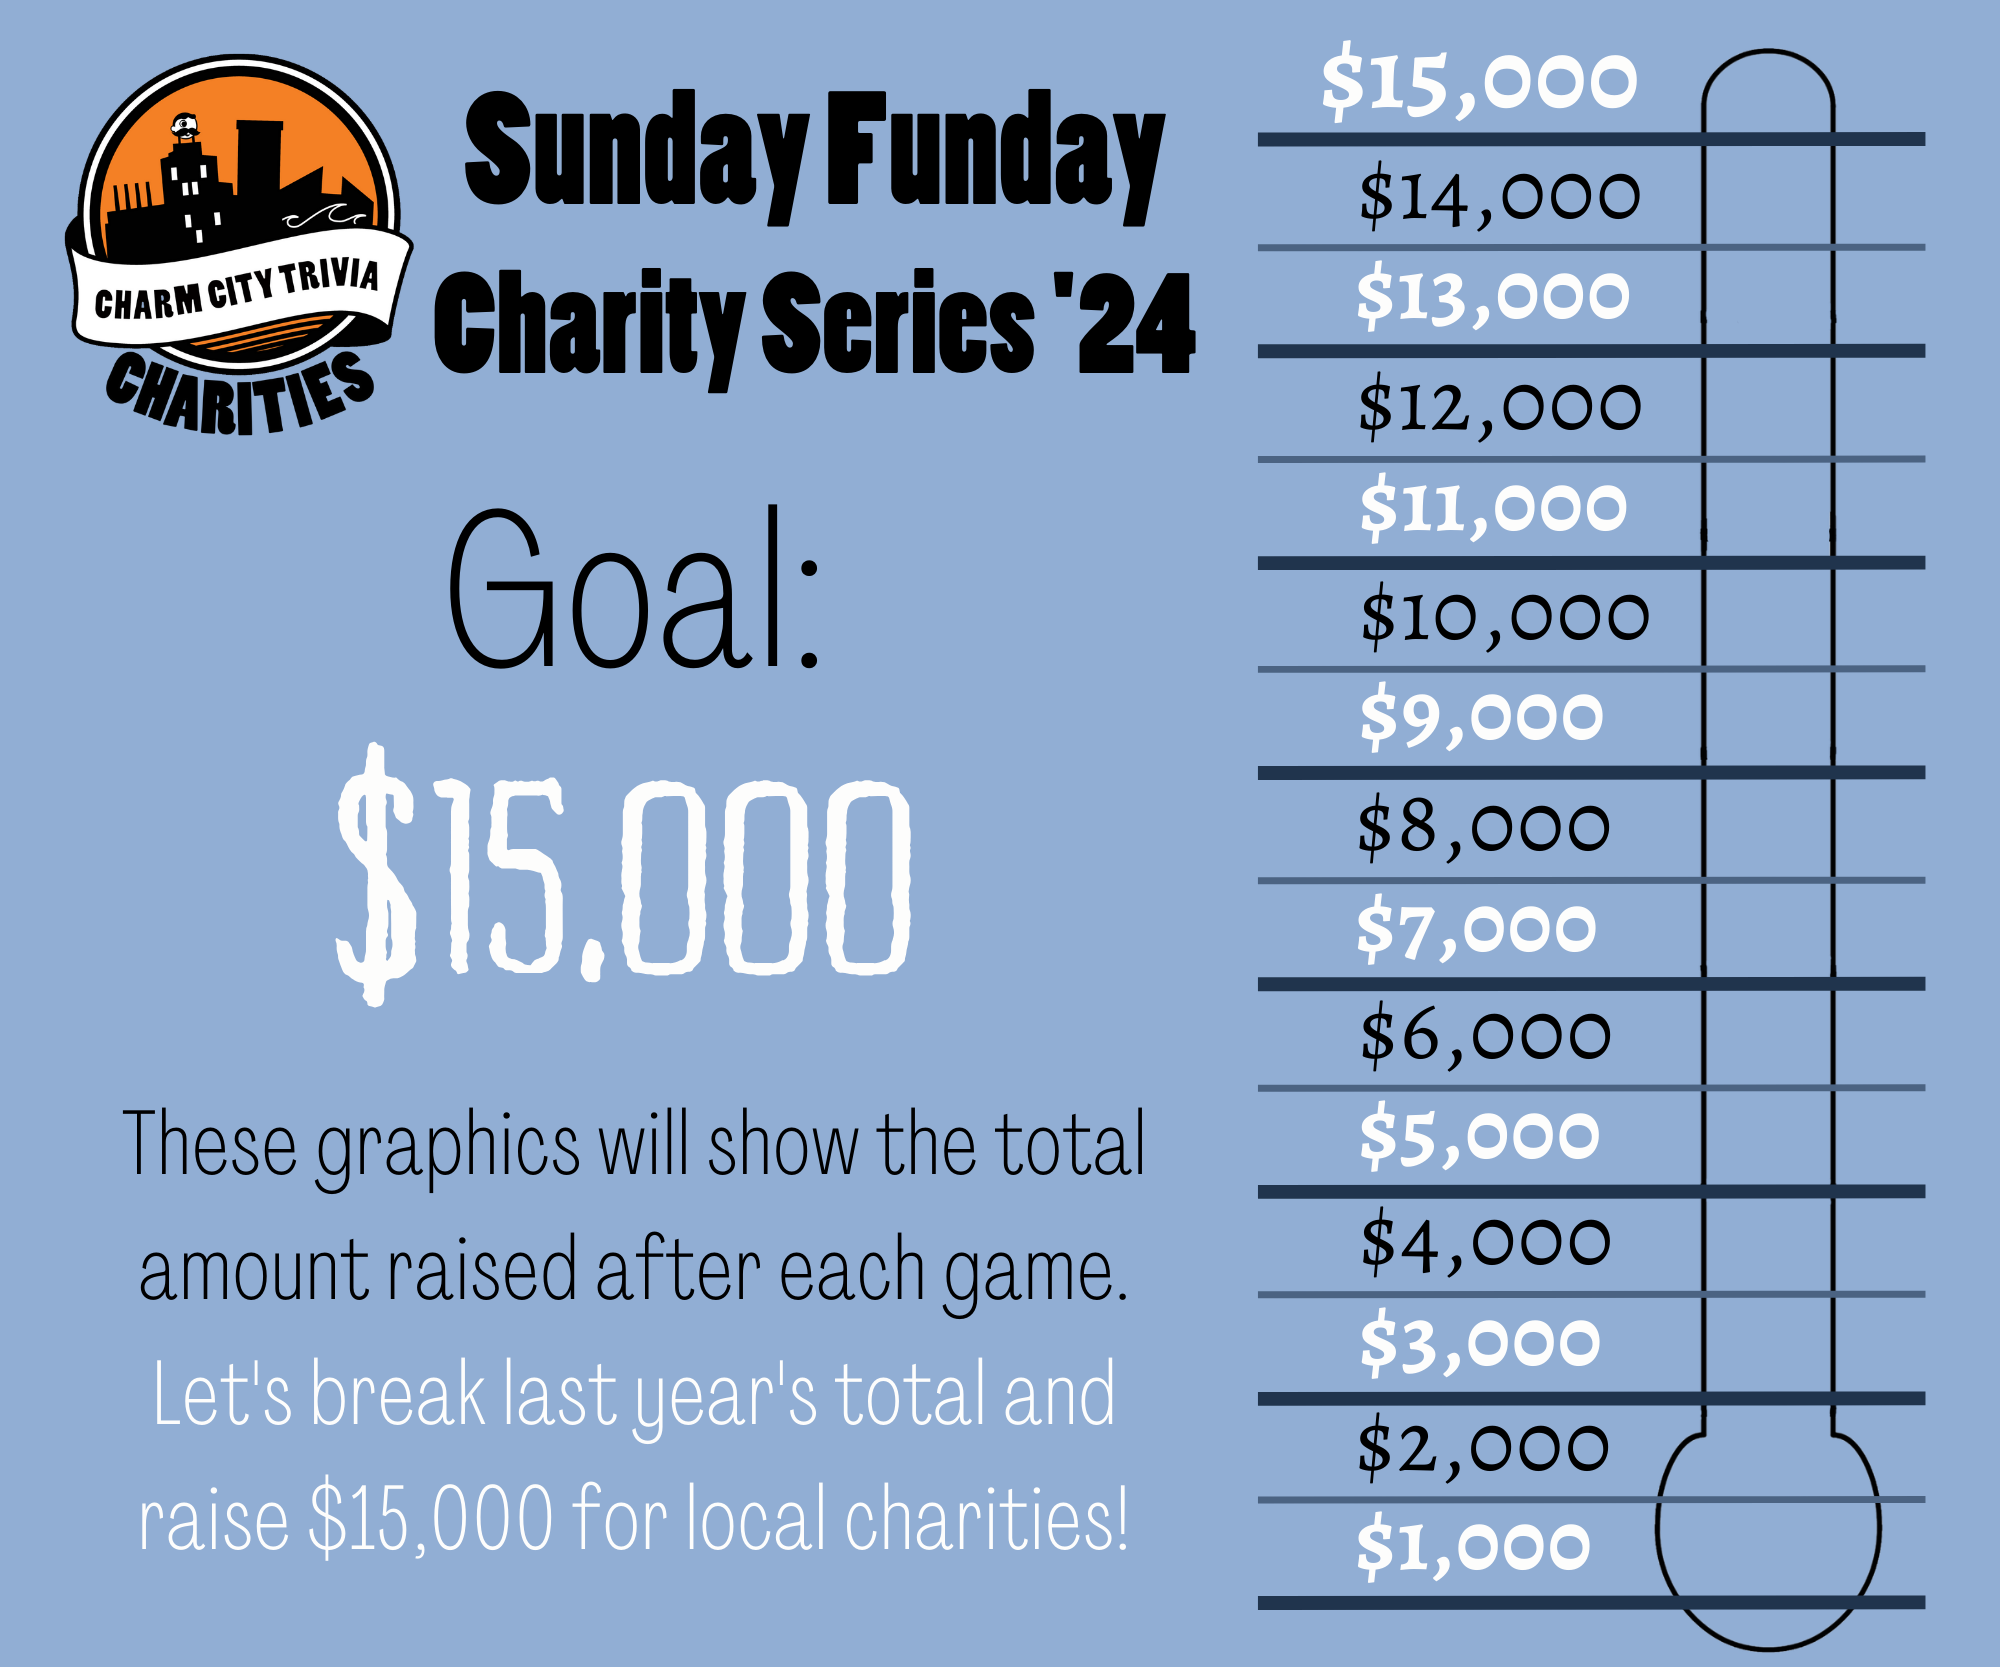 a light blue background with a fundraiser style thermometer, lines separating the thermometer into donation milestones from $1,000 to $15,000, the Charm City Trivia Charities logo, and black and white text. The text reads: Sunday Funday Charity Series '24. Goal: $15,000. These graphics will show the total amount raised after each game. Let's break last year's total and raise $15,000 for local charities!